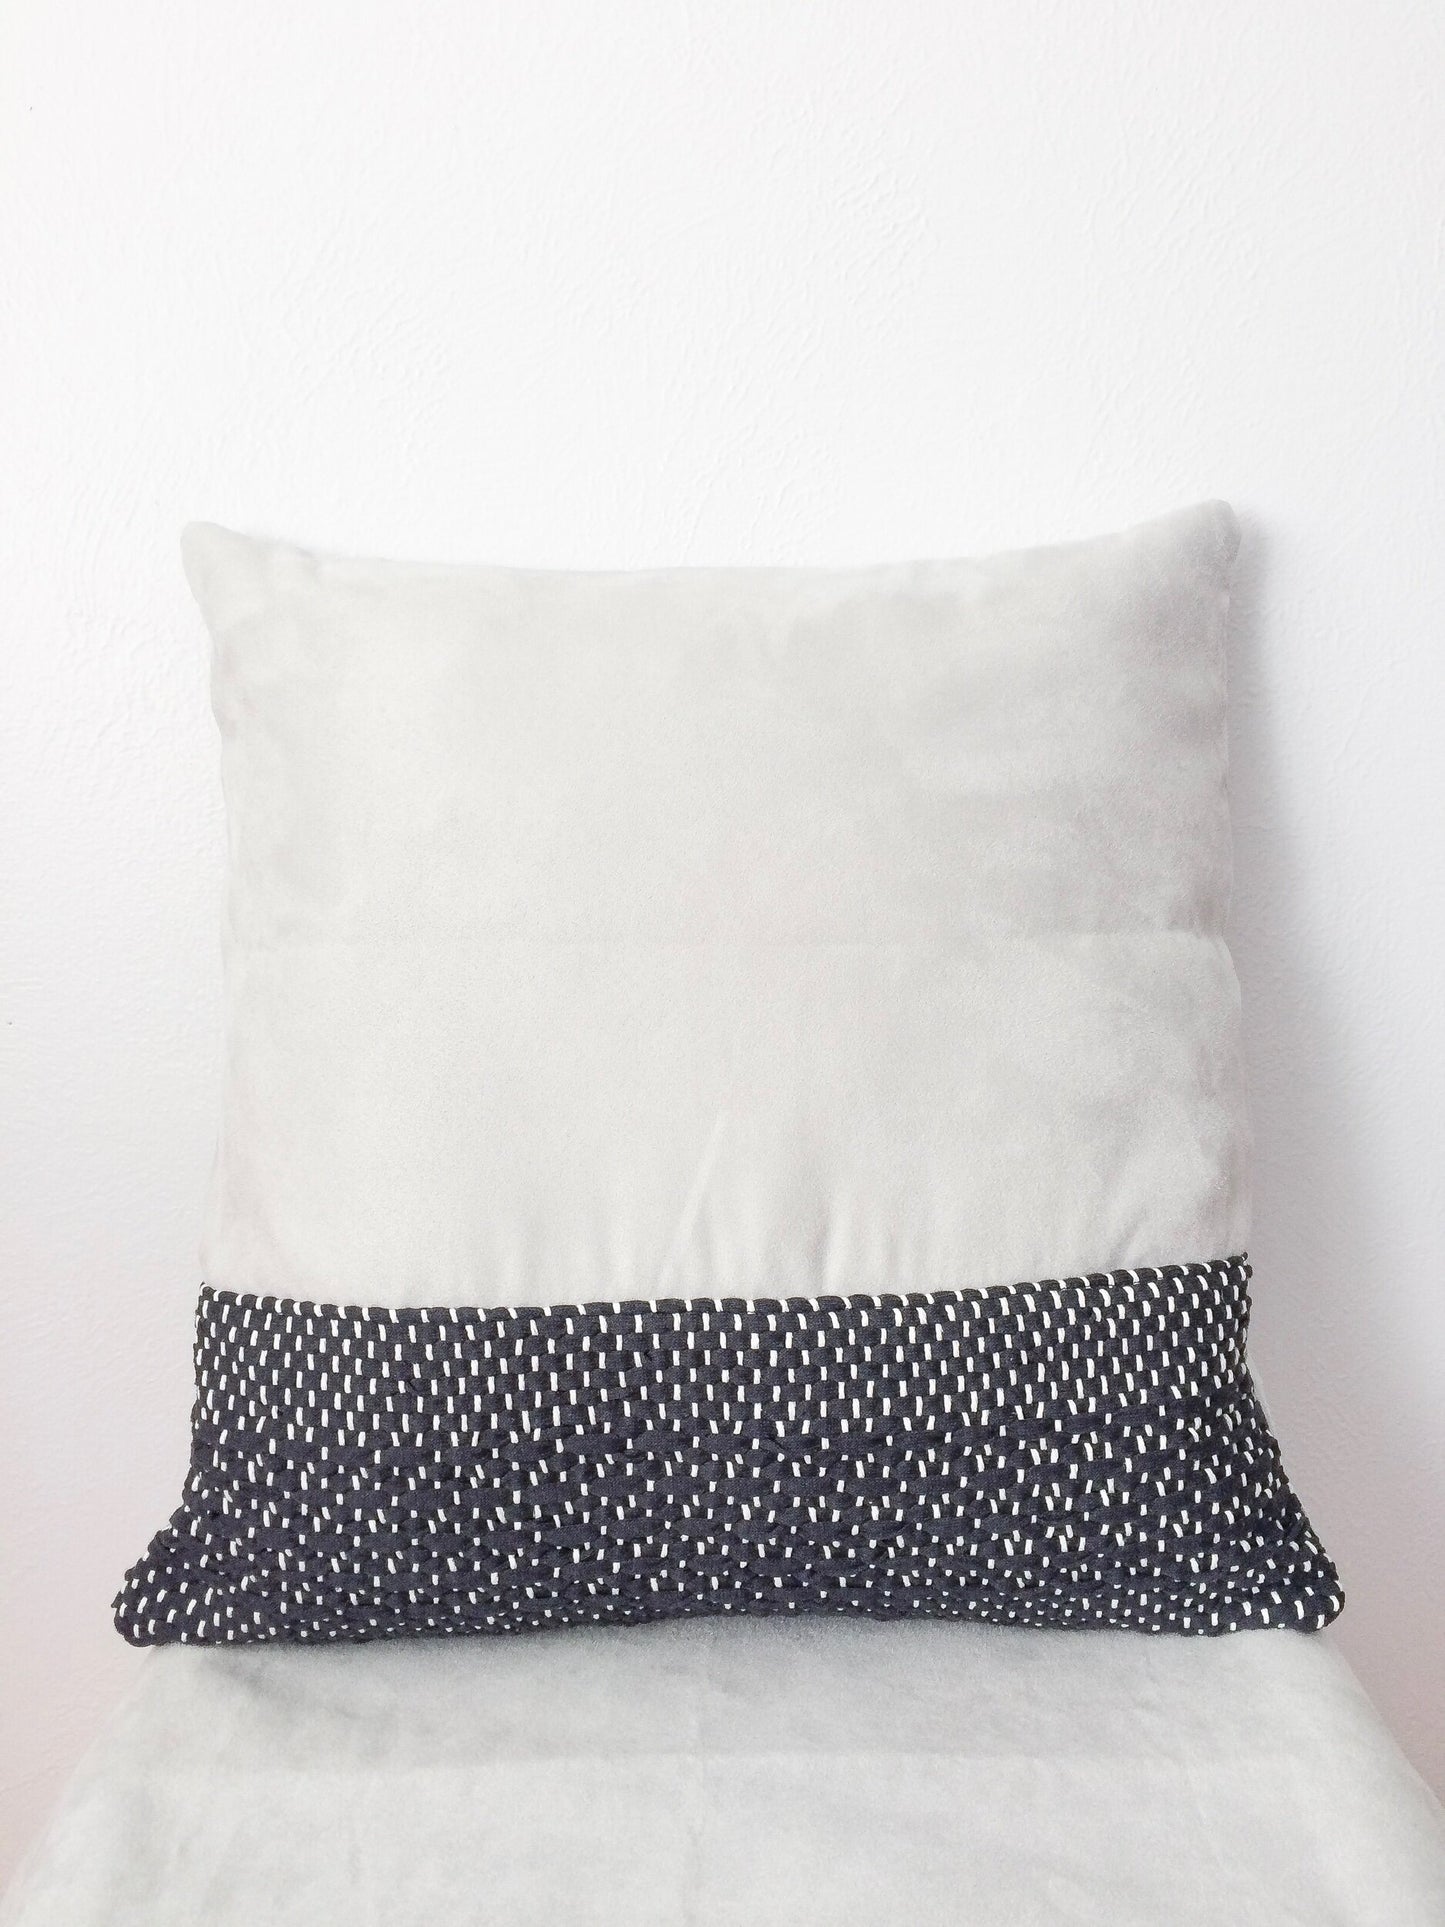 Charcoal and grey woven pillow